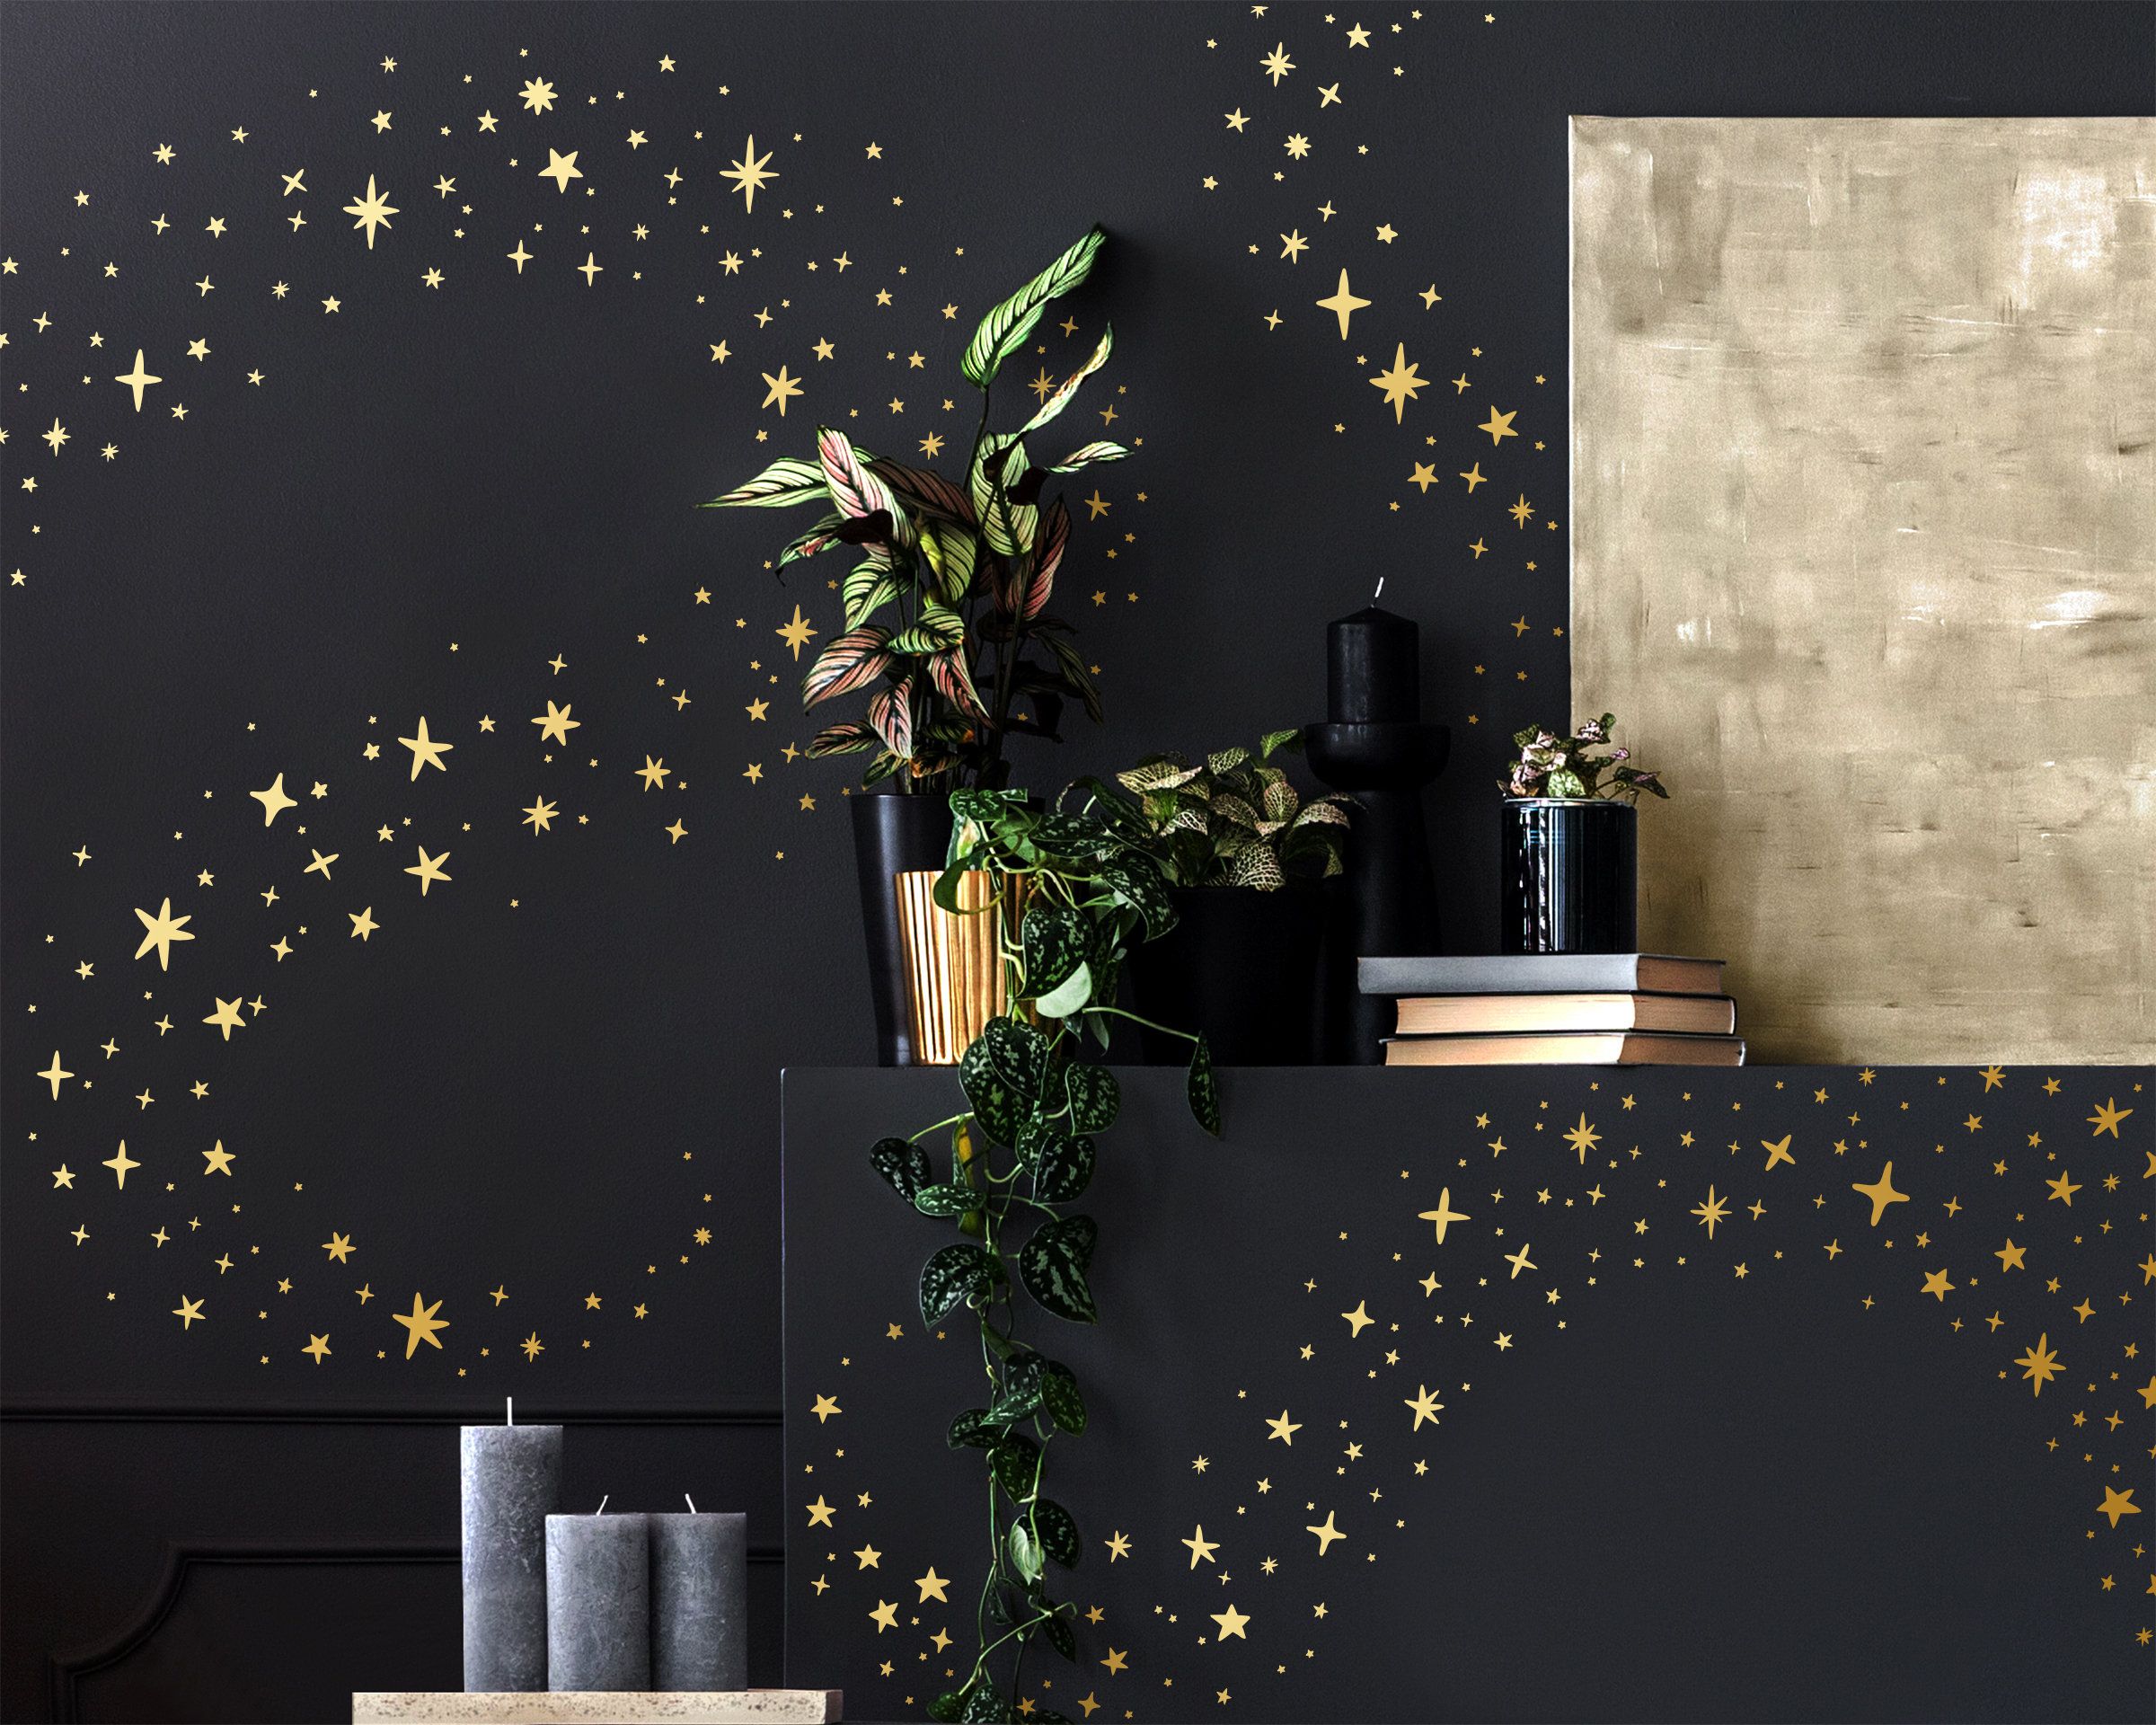 Sparkles And Stars Wall Decals Nursery Decals Star Decals – Etsy With Regard To Current Stars Wall Art (View 1 of 20)